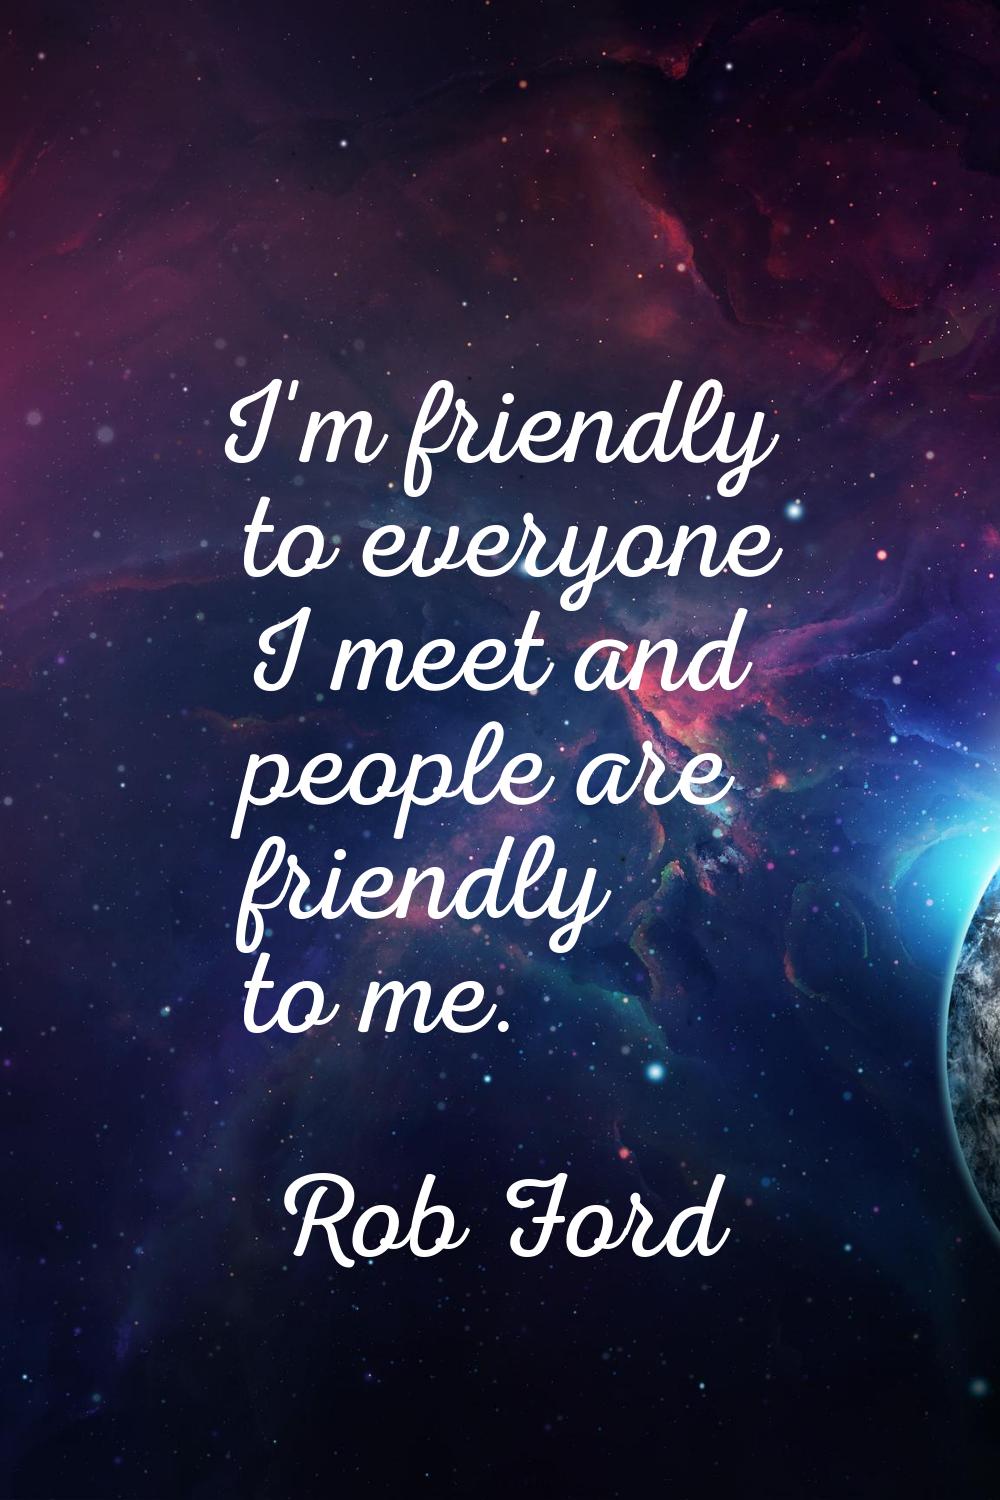 I'm friendly to everyone I meet and people are friendly to me.